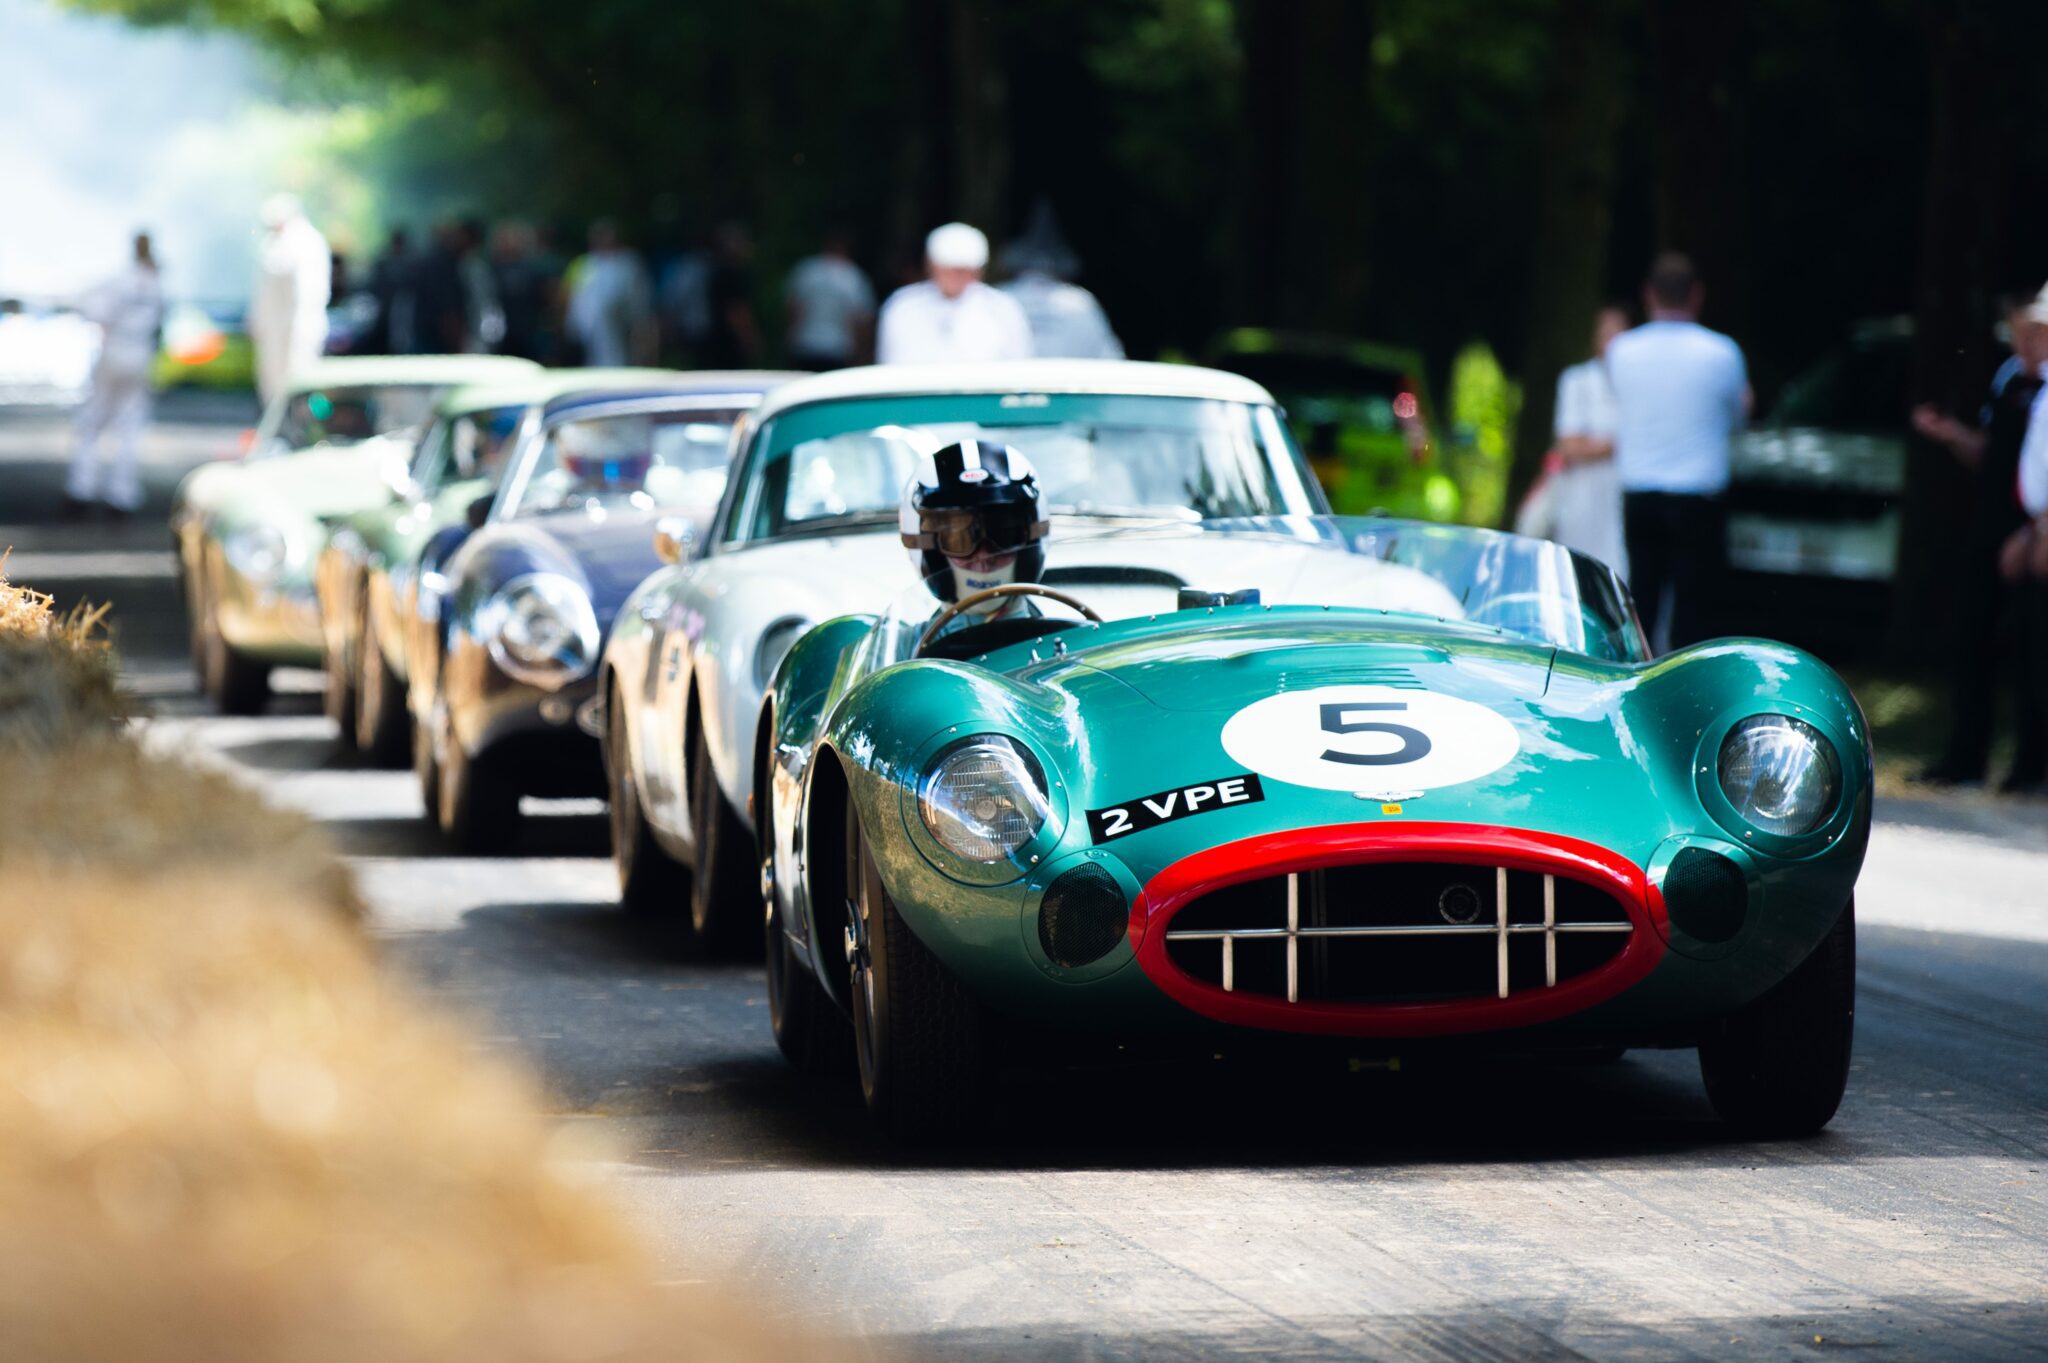 Vintage race cars lined up on the Goodwood racetrack